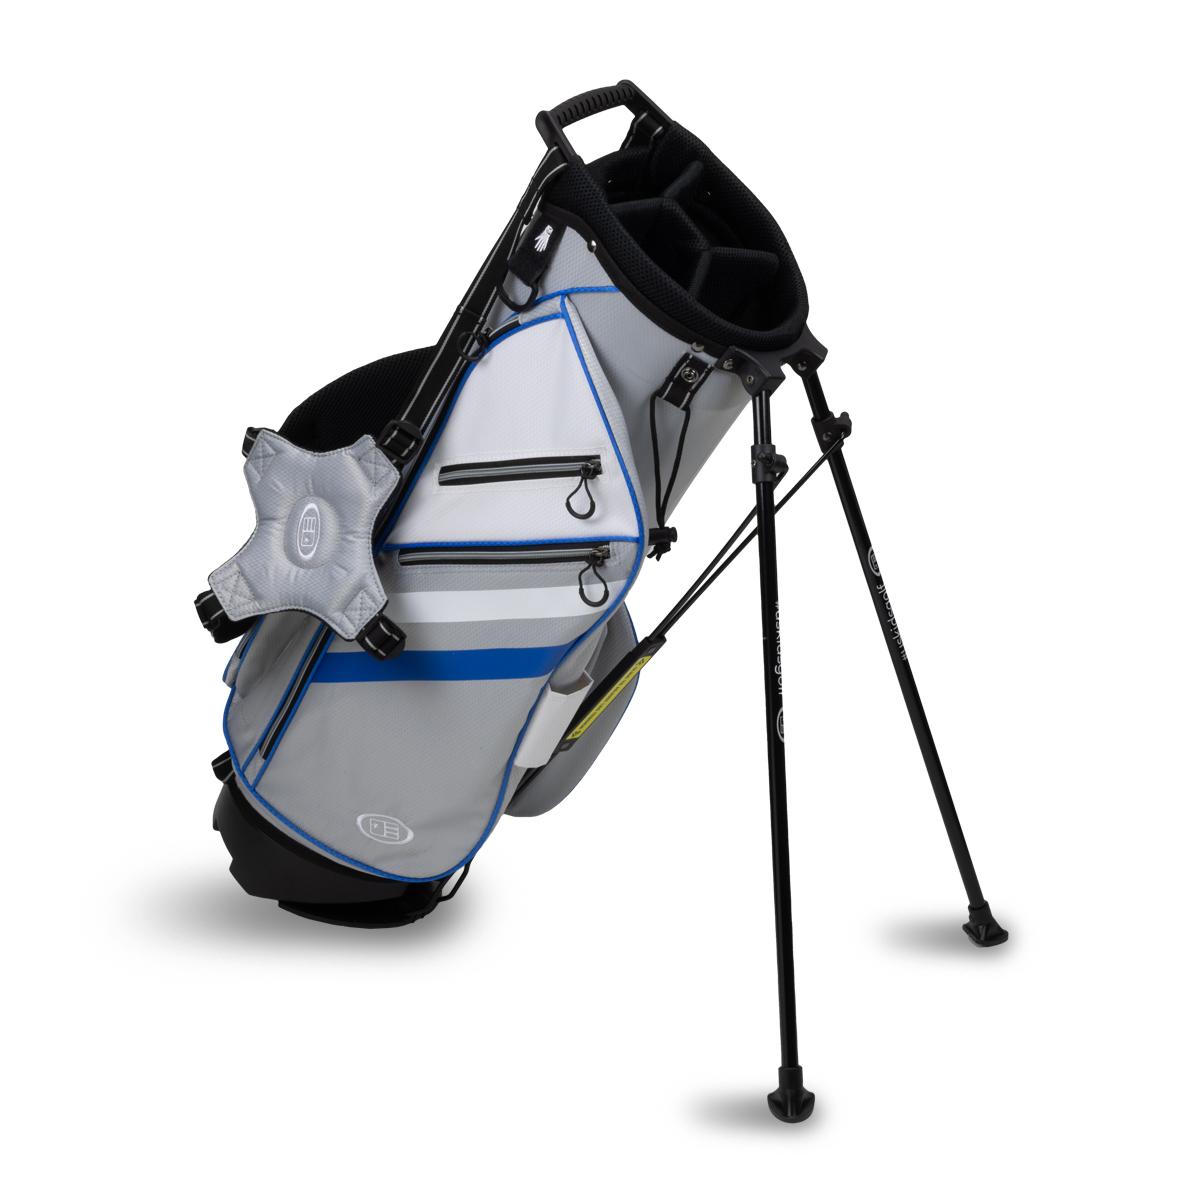 TS5-60  Stand Bag  32 inch, Silver/White Bag